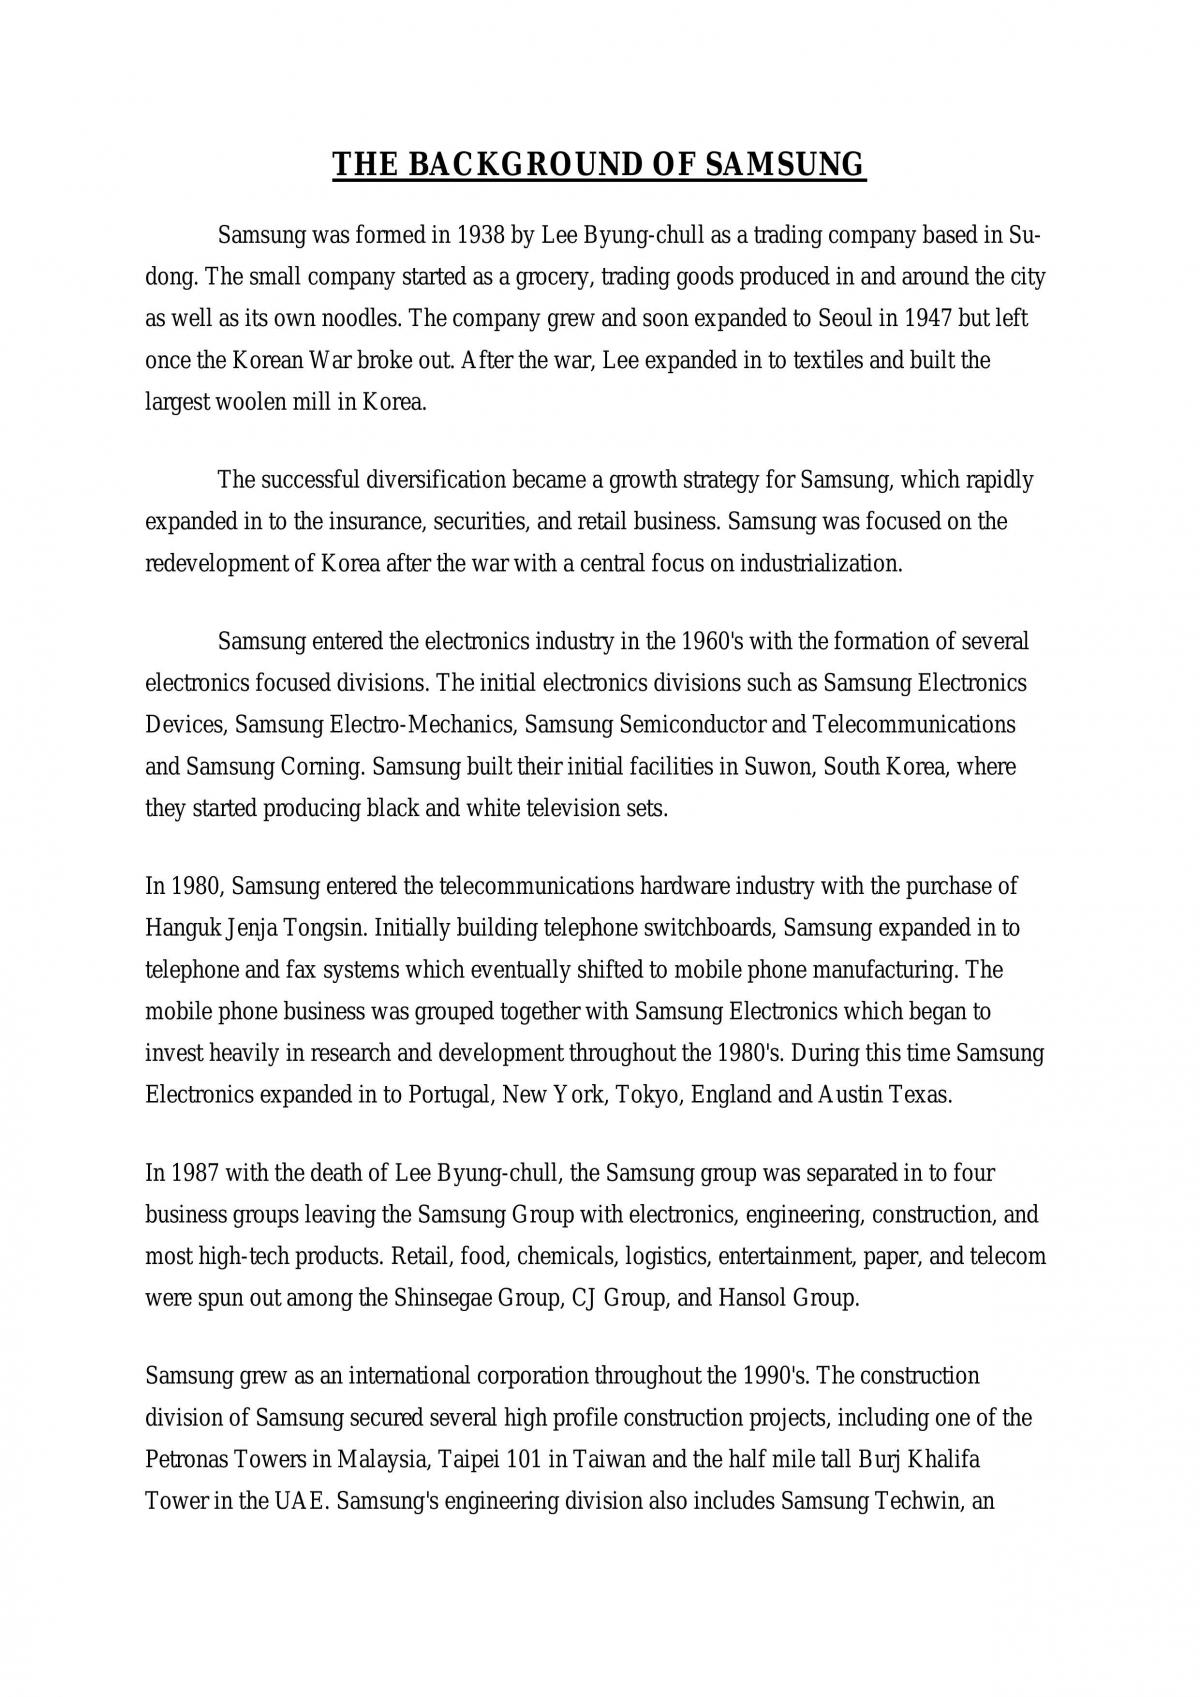 essay about samsung company